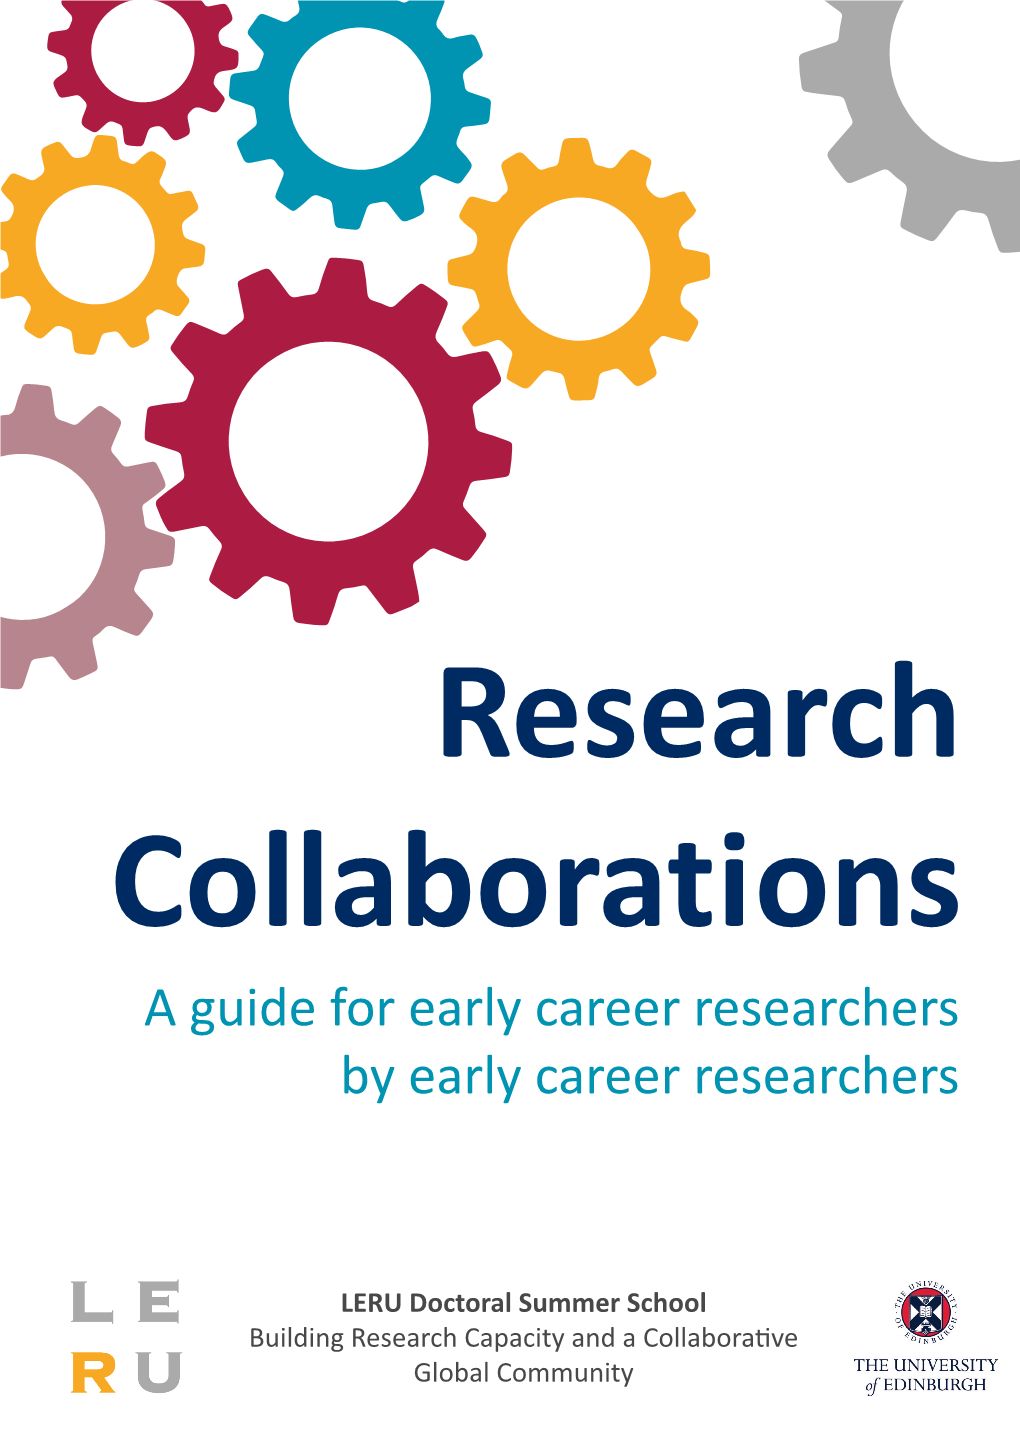 A Guide for Early Career Researchers by Early Career Researchers